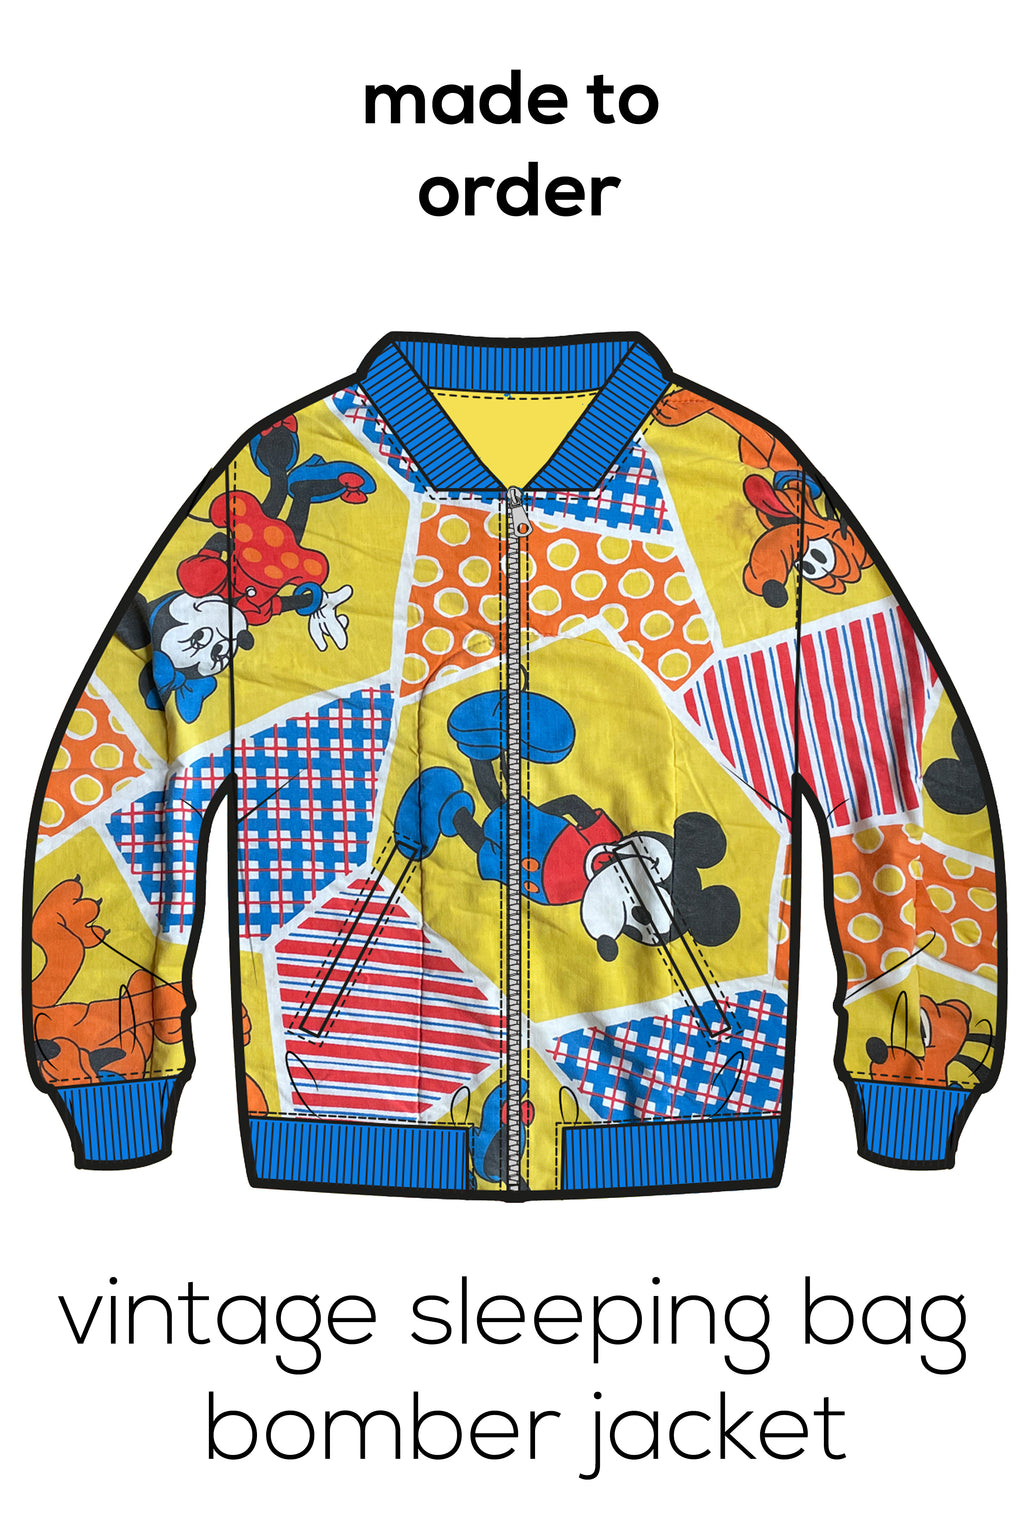 Made To Order - Vintage 1970s "Mickey Mouse Disney" Sleeping Bag Bomber Jacket, size XS - XXL